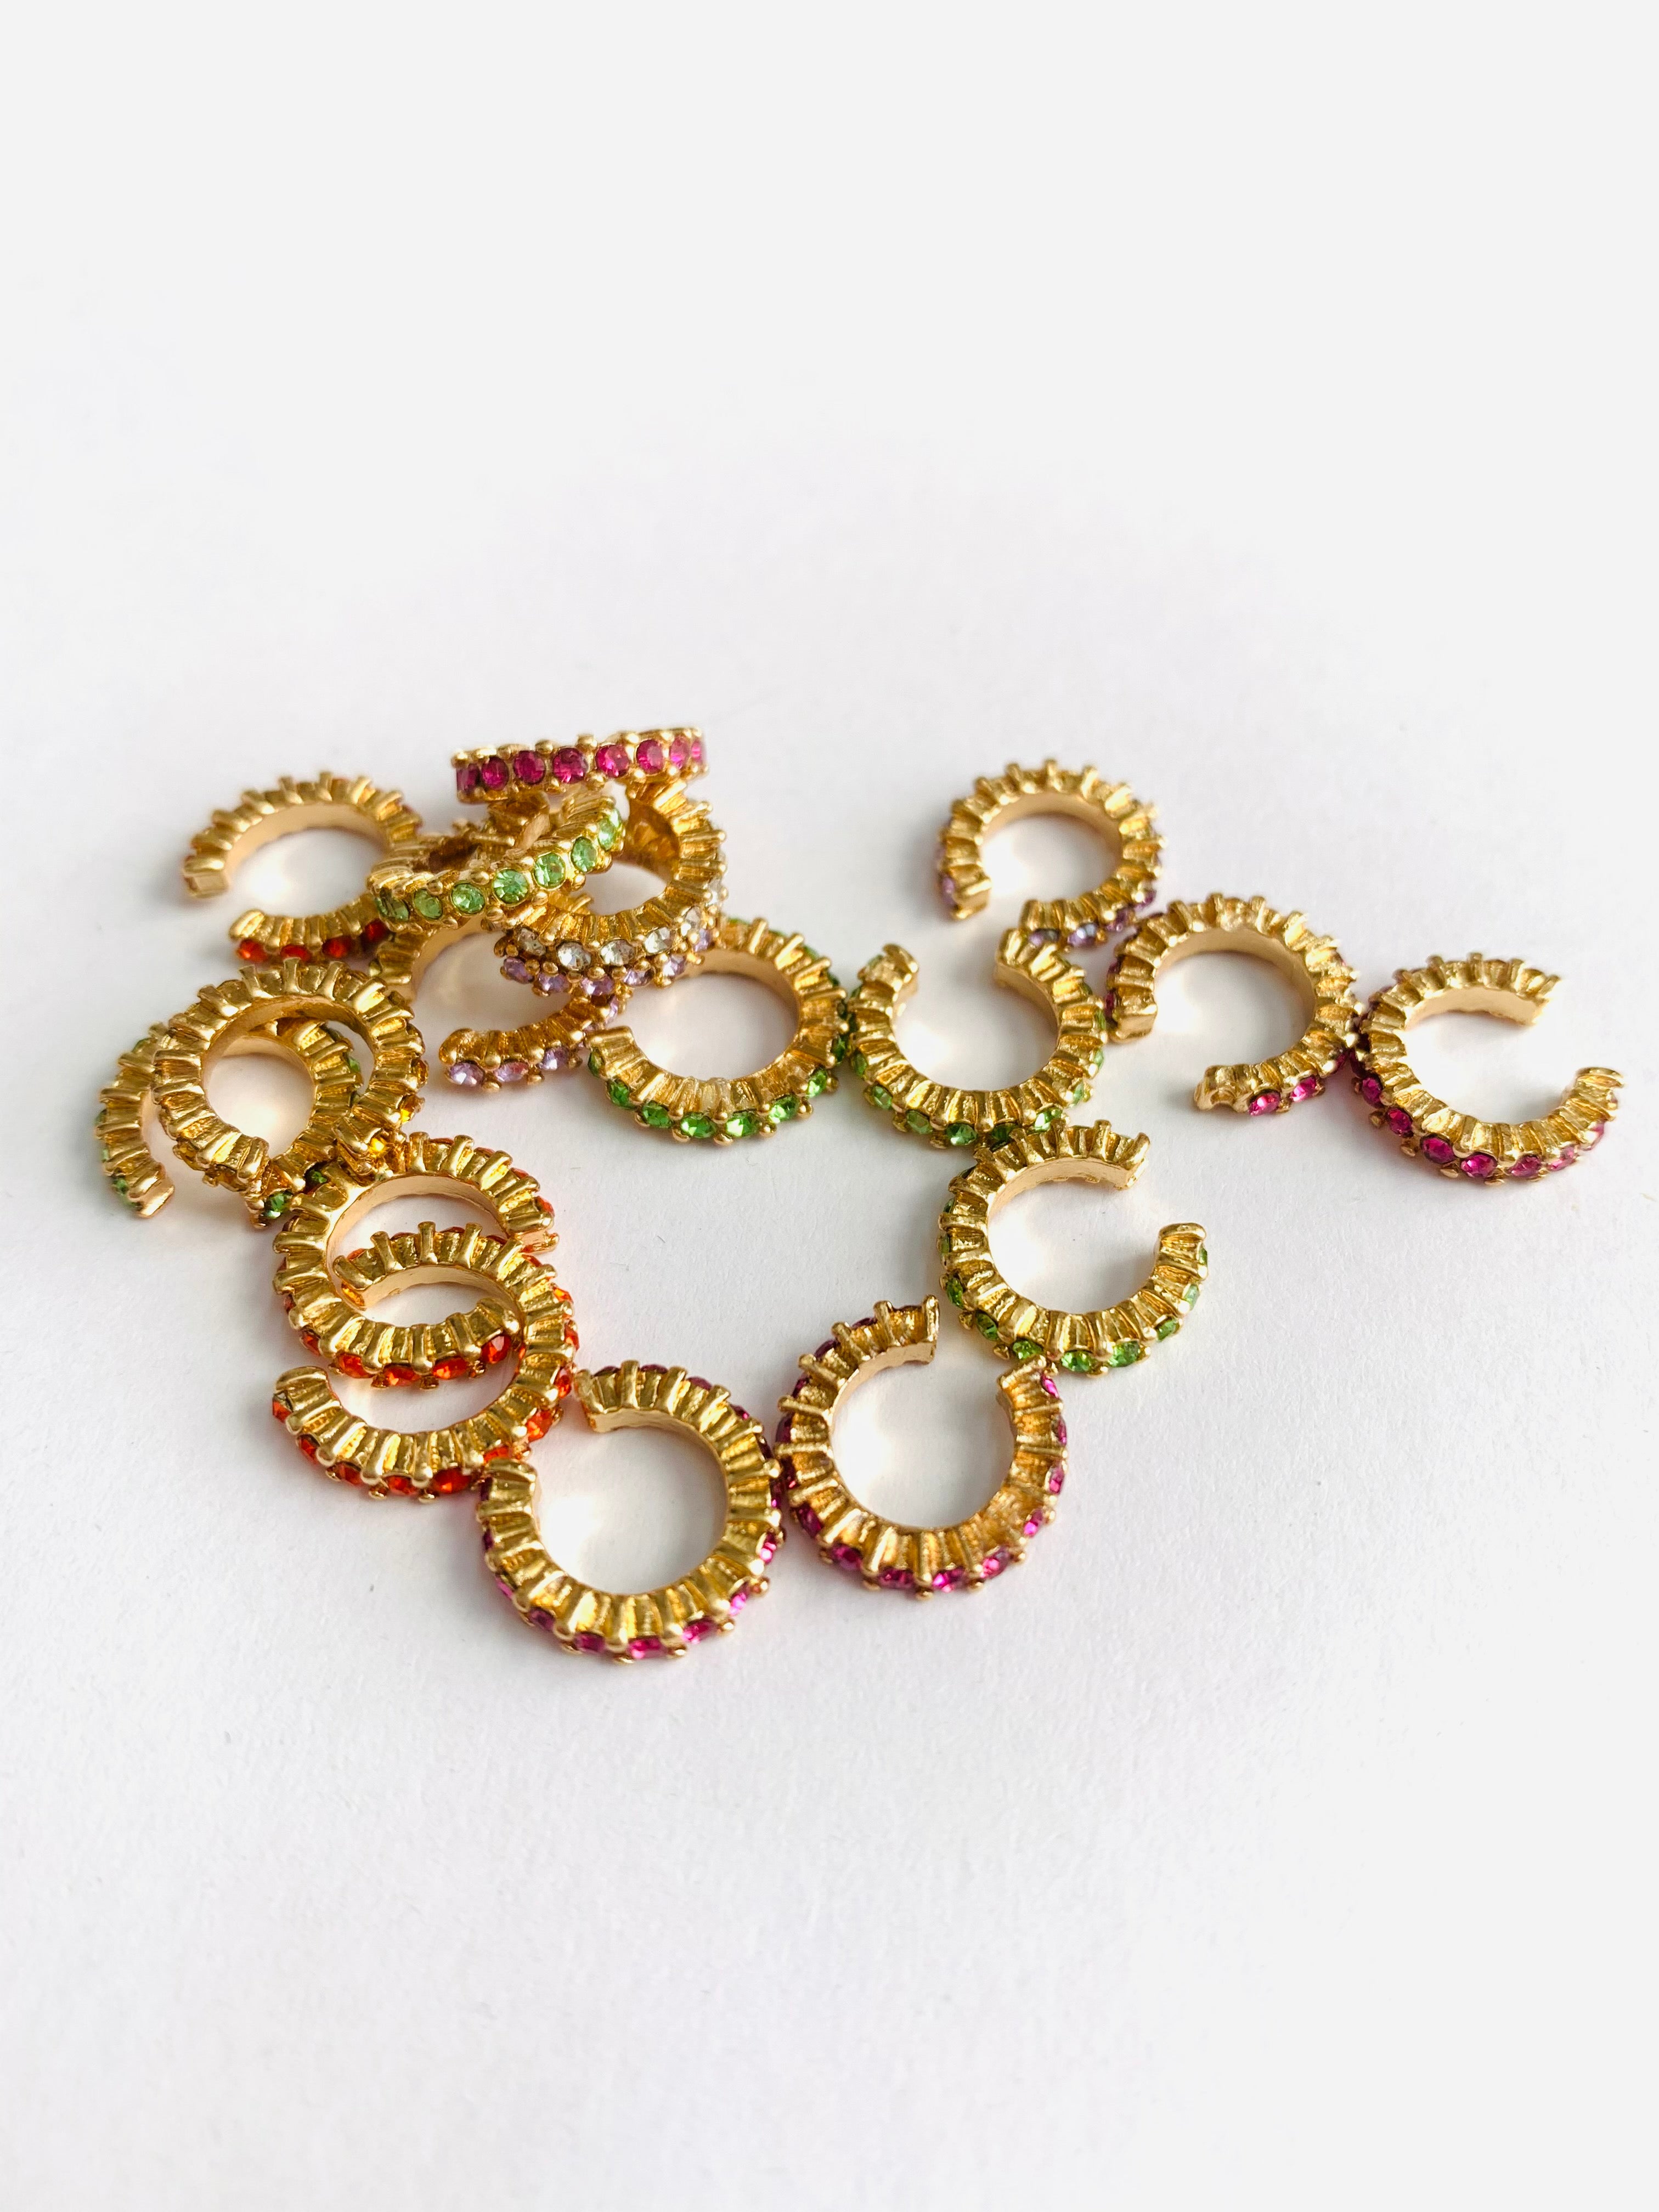 NEW! Silver and Gold Sparkly Ear Cuffs